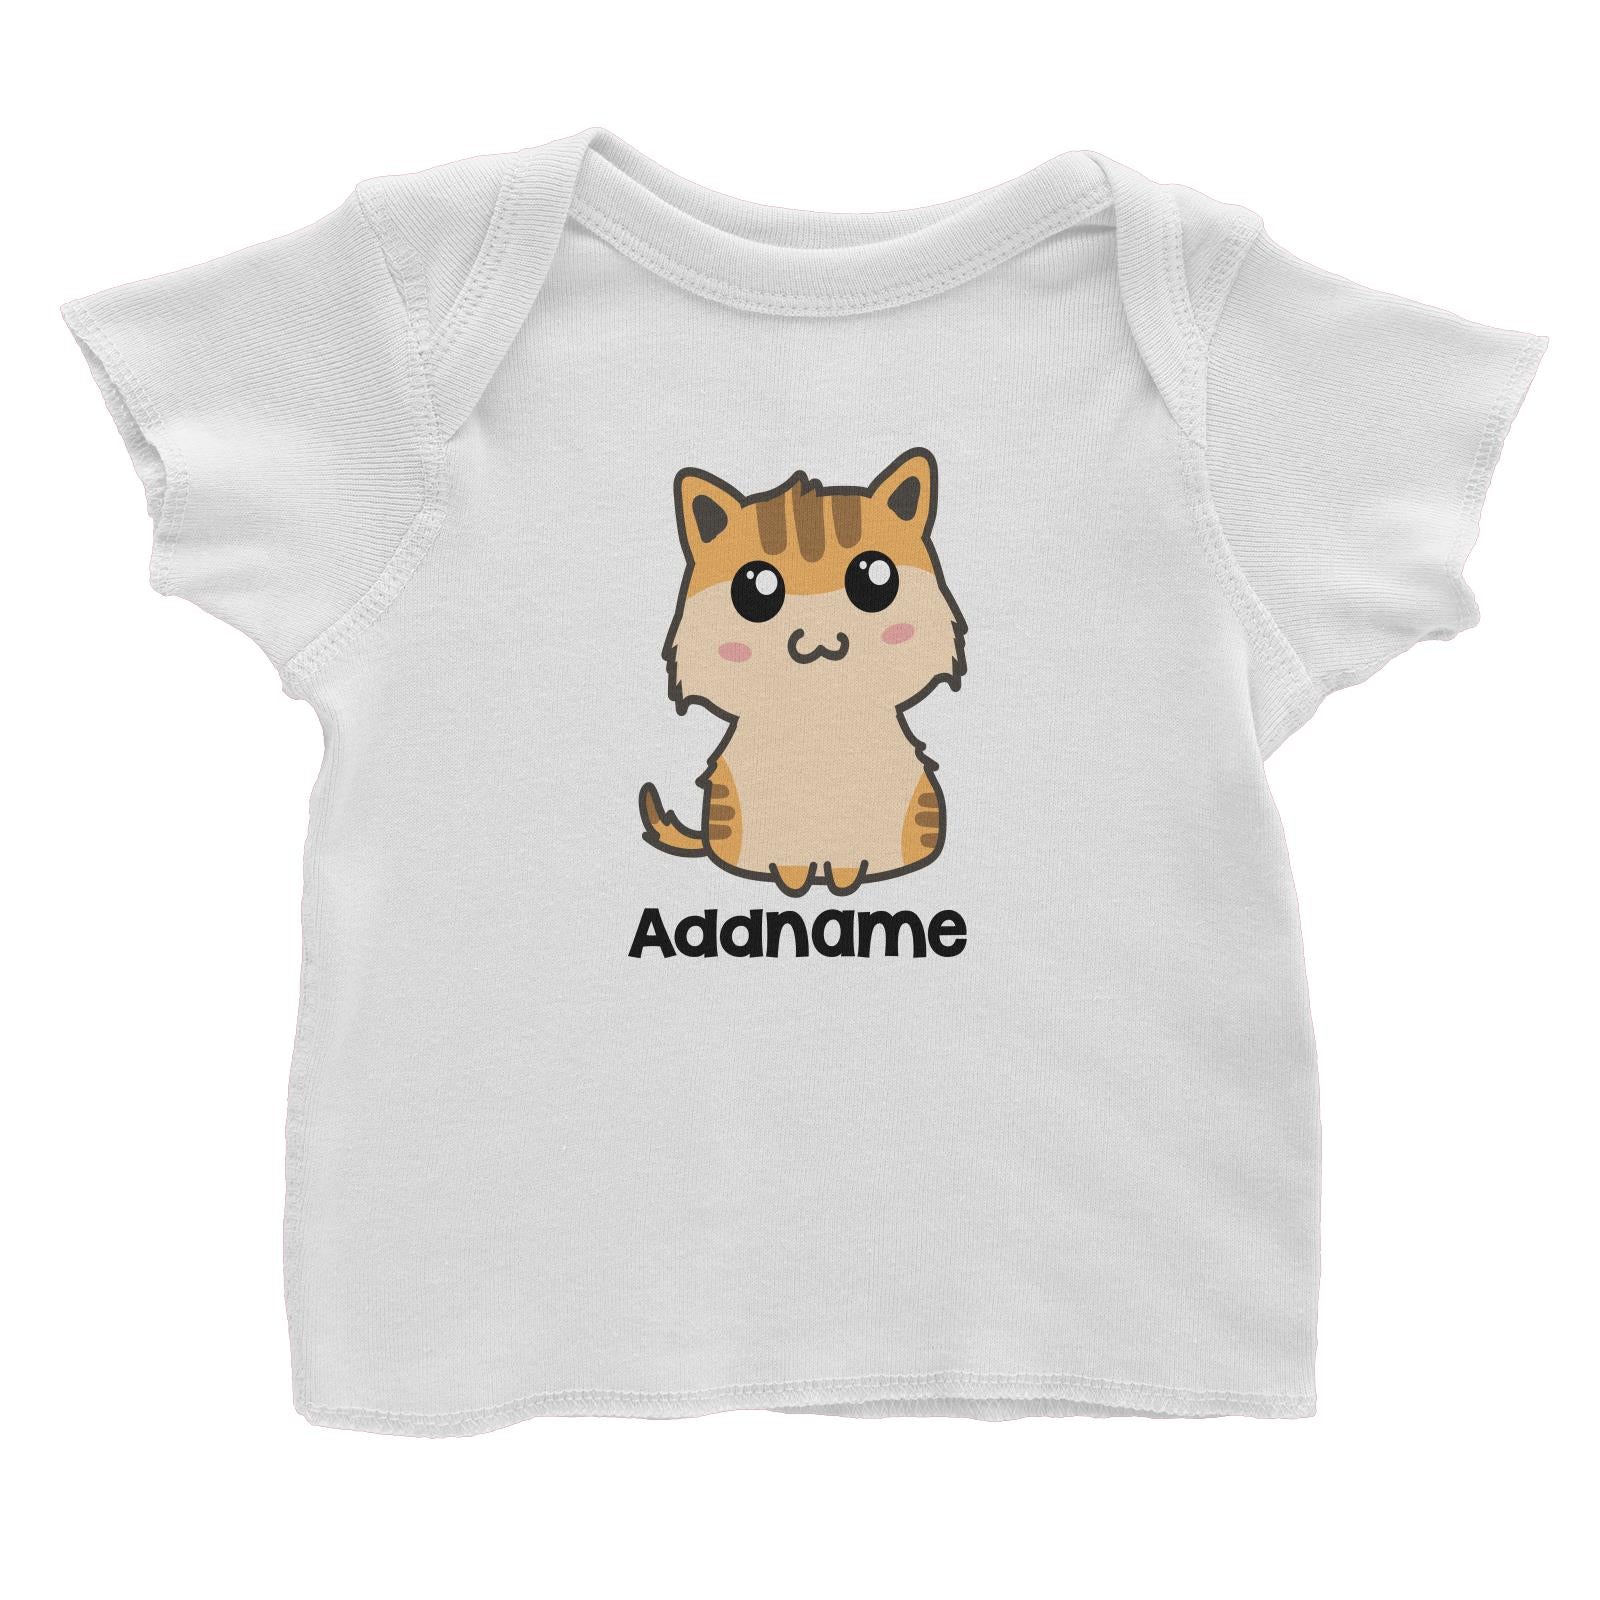 Drawn Adorable Cats Cream & Yellow Addname Baby T-Shirt